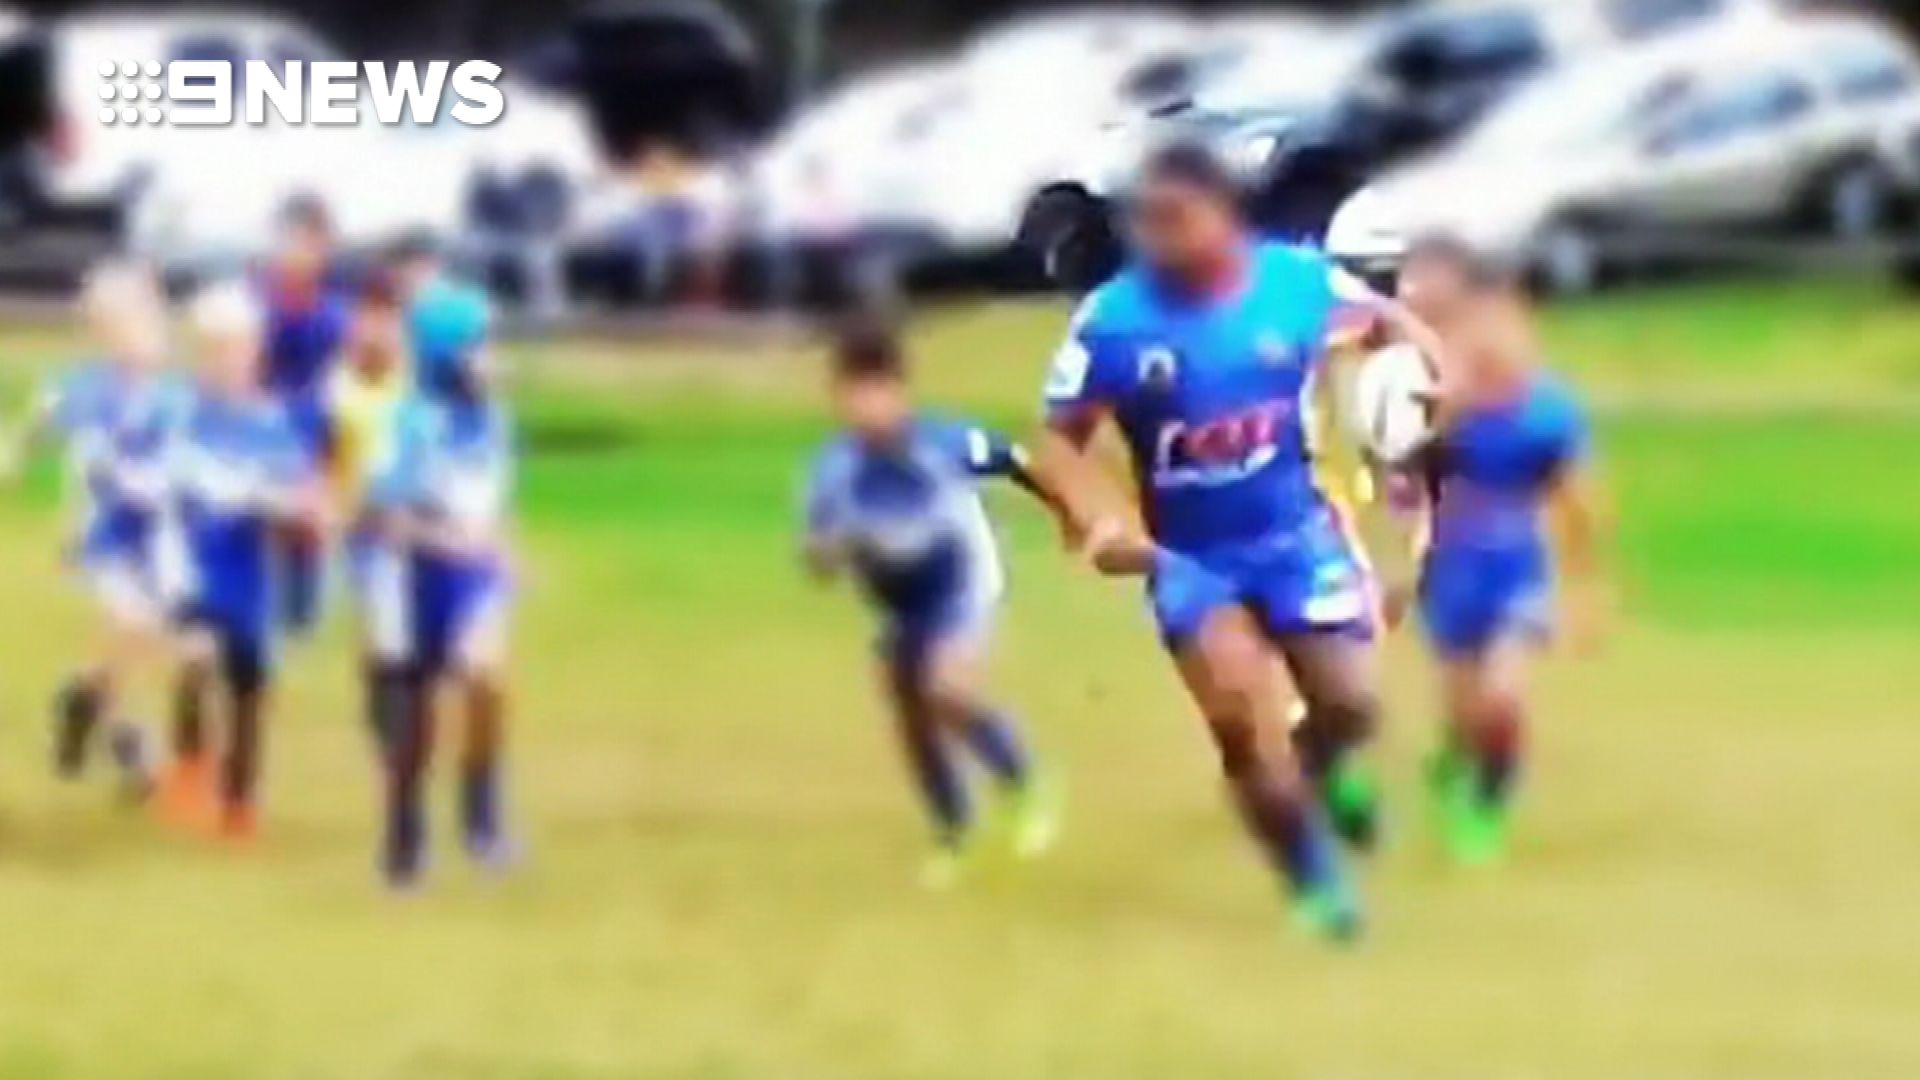 Junior Bulldogs player ignites age vs. weight debate in Rugby League